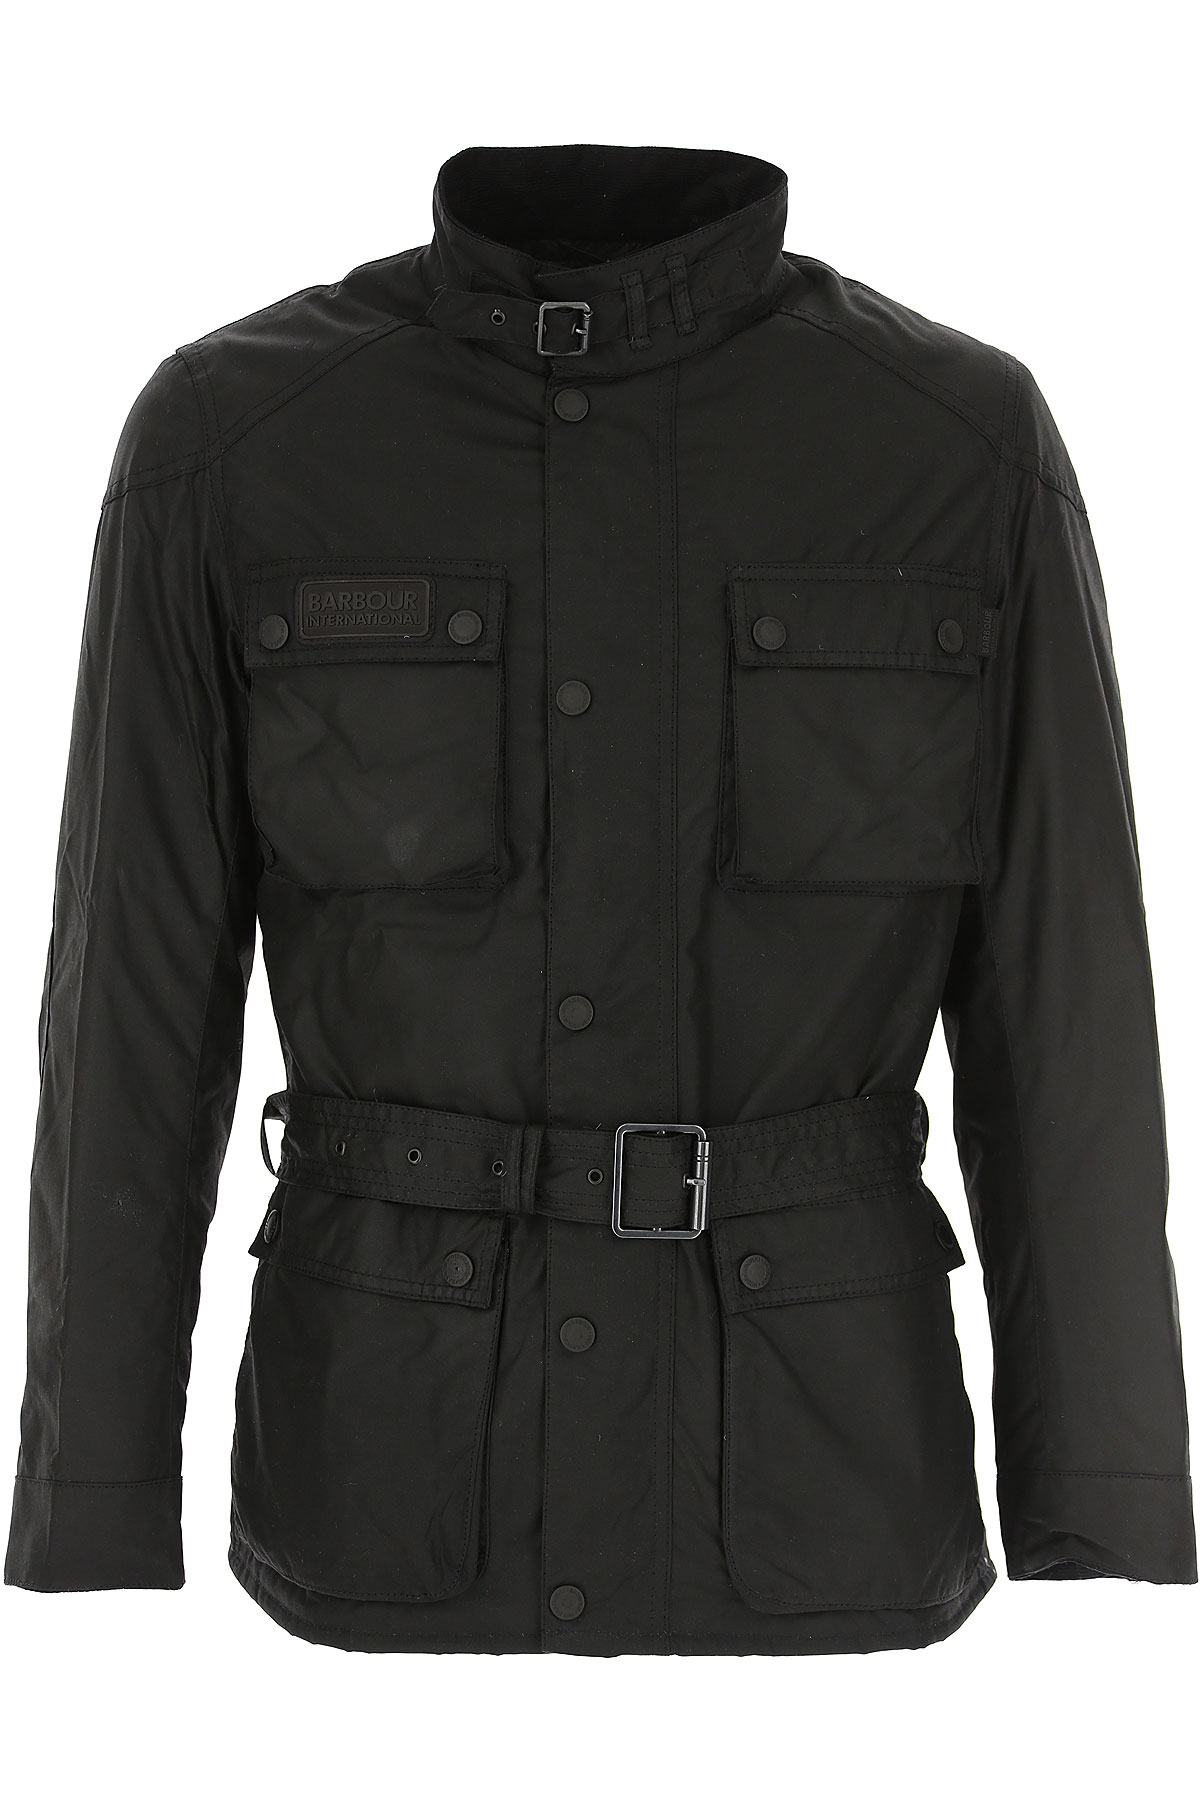 Mens Clothing Barbour, Style code: mwx0928-bk71-E425